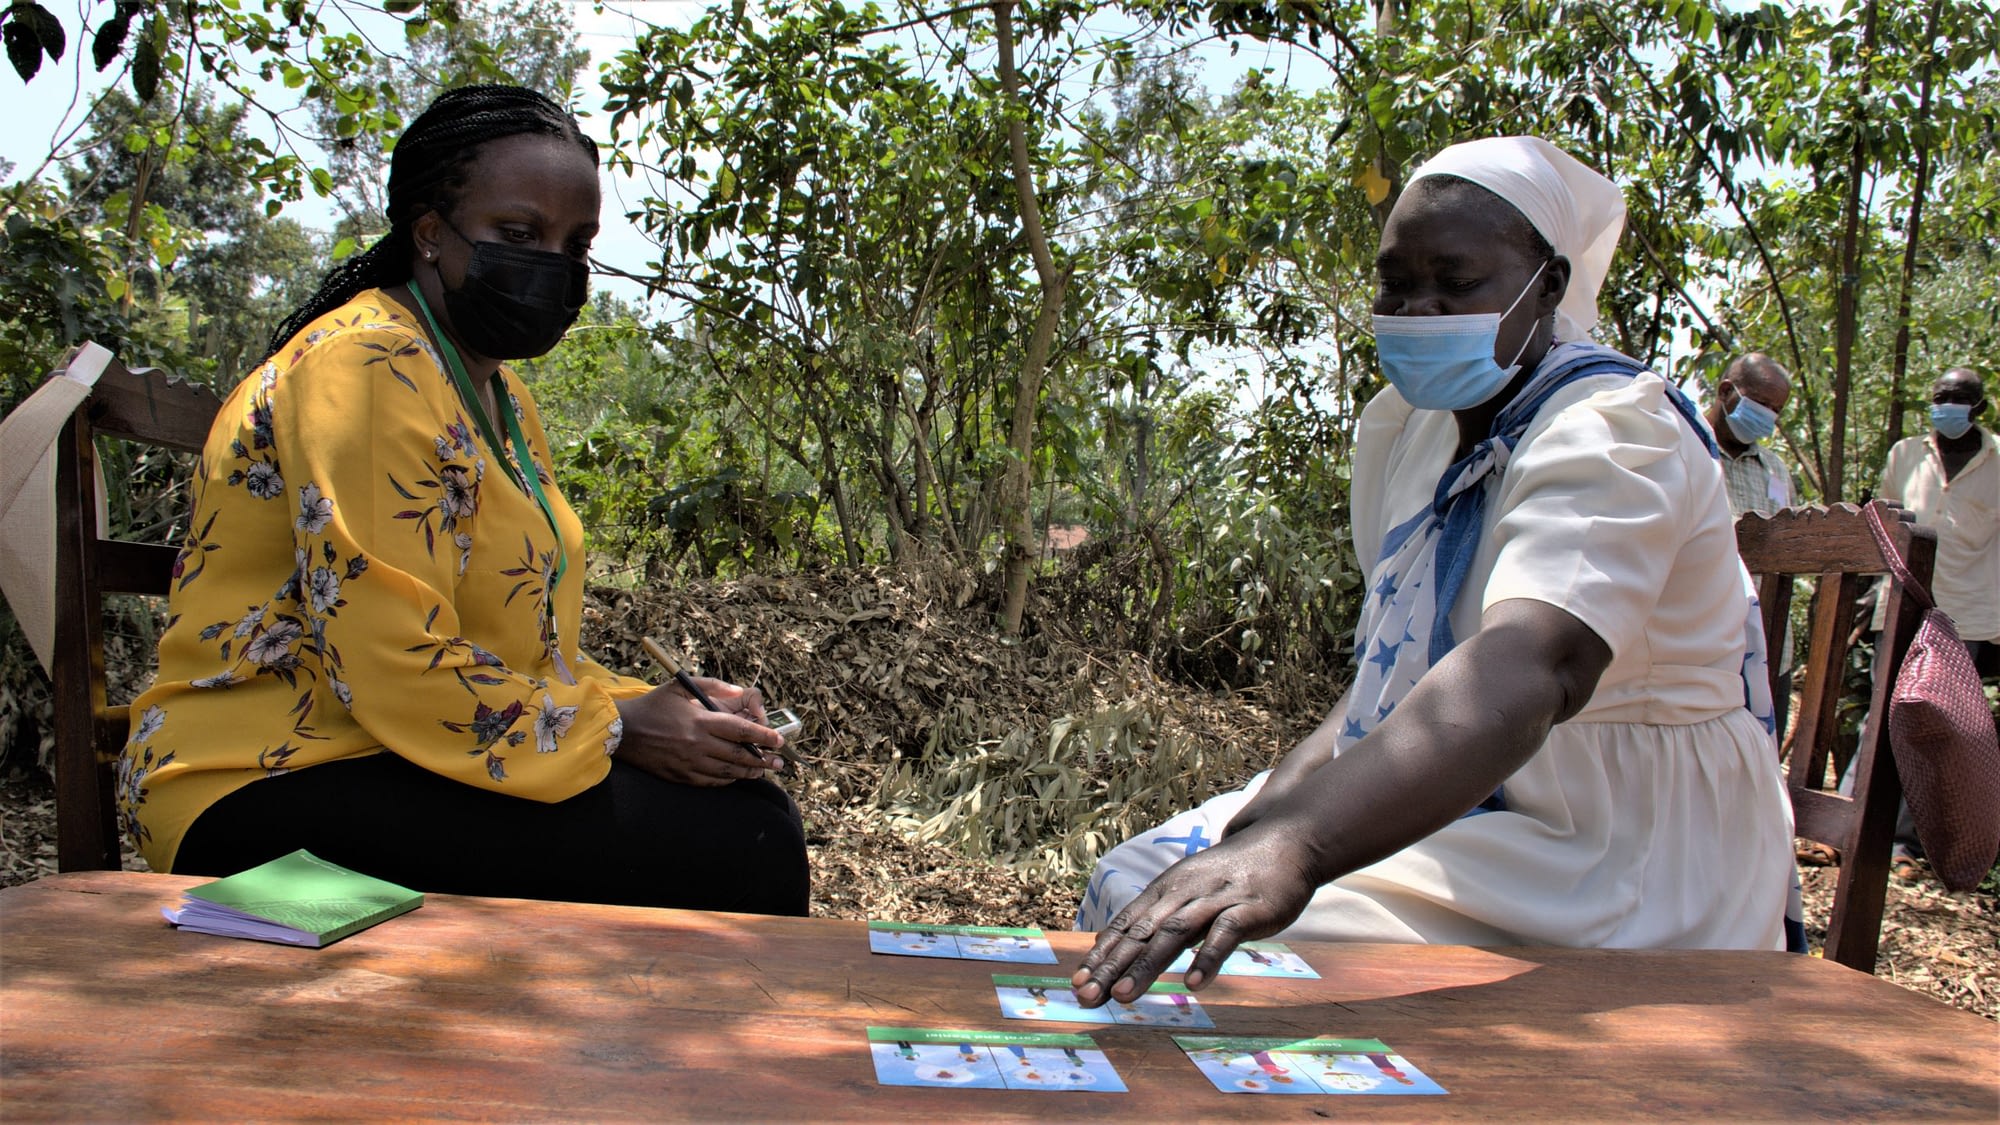 Pauline Muindi (left), Gender Research Associate at CIMMYT listens to Wilbroda (right), a maize farmer from Kakamega County, Kenya, giving feedback on decision-making between spouses on maize farming. On the table are vignettes showing five different decision-making scenarios based on fictitious husband and wife characters. (Photo: Susan Umazi Otieno/CIMMYT)